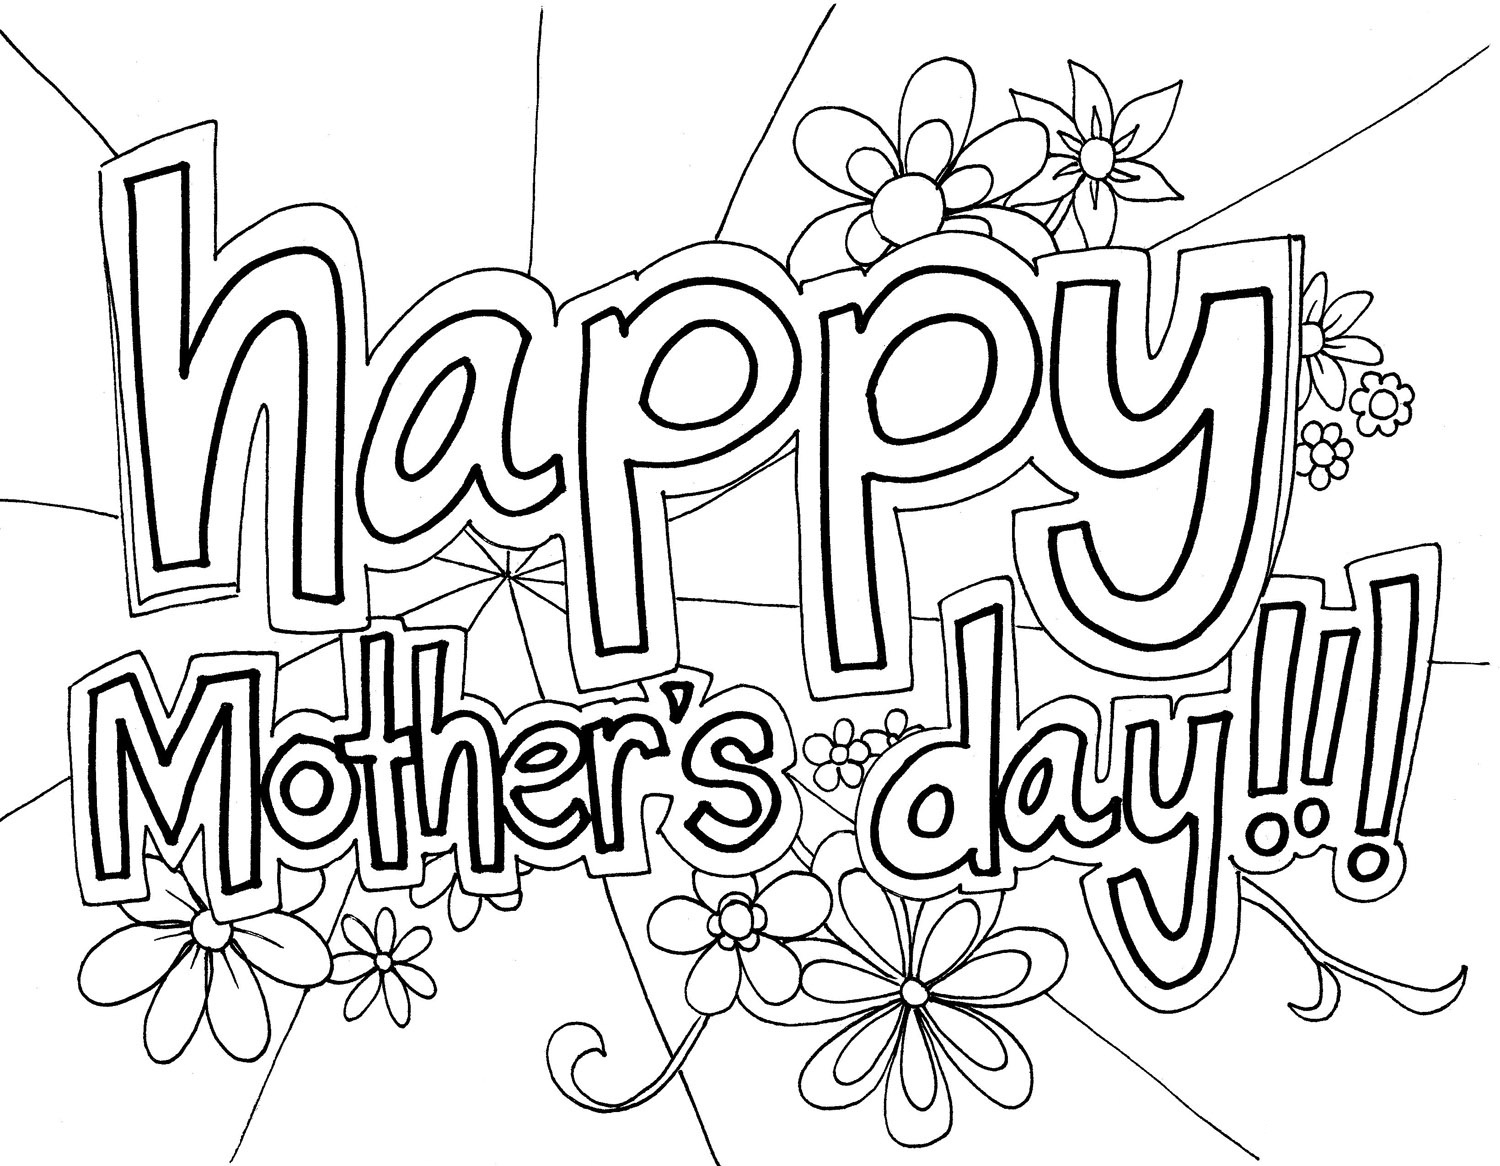 Free Printable Mothers Day Coloring Pages - Coloring Pages For Kids - Free Printable Mothers Day Coloring Pages